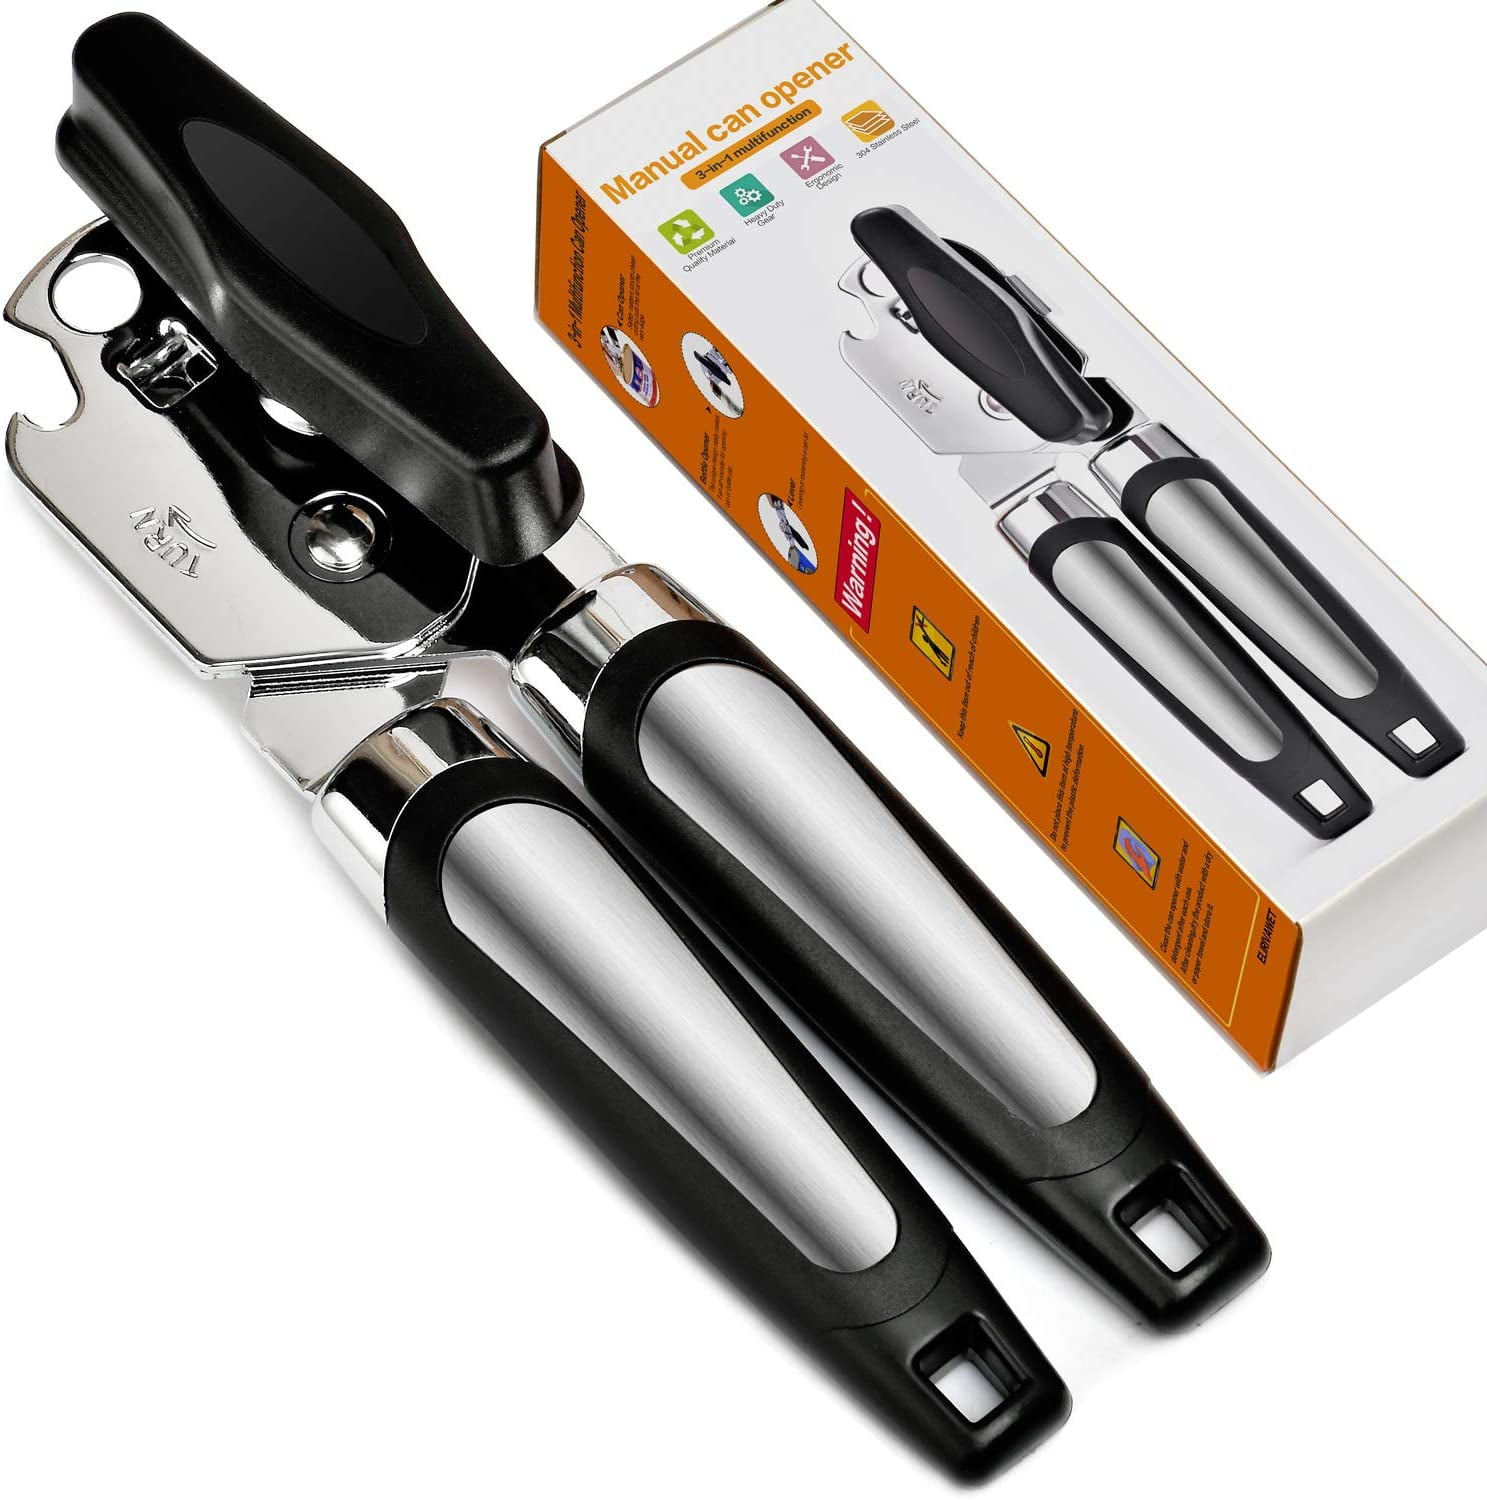 3 in 1 multi function kitchen tool Made from Stainless Steel with easy turn handle BLUE COLOUR OPTION Can opener manual cordless tin opener with lid off and jar off function and bottle opener 